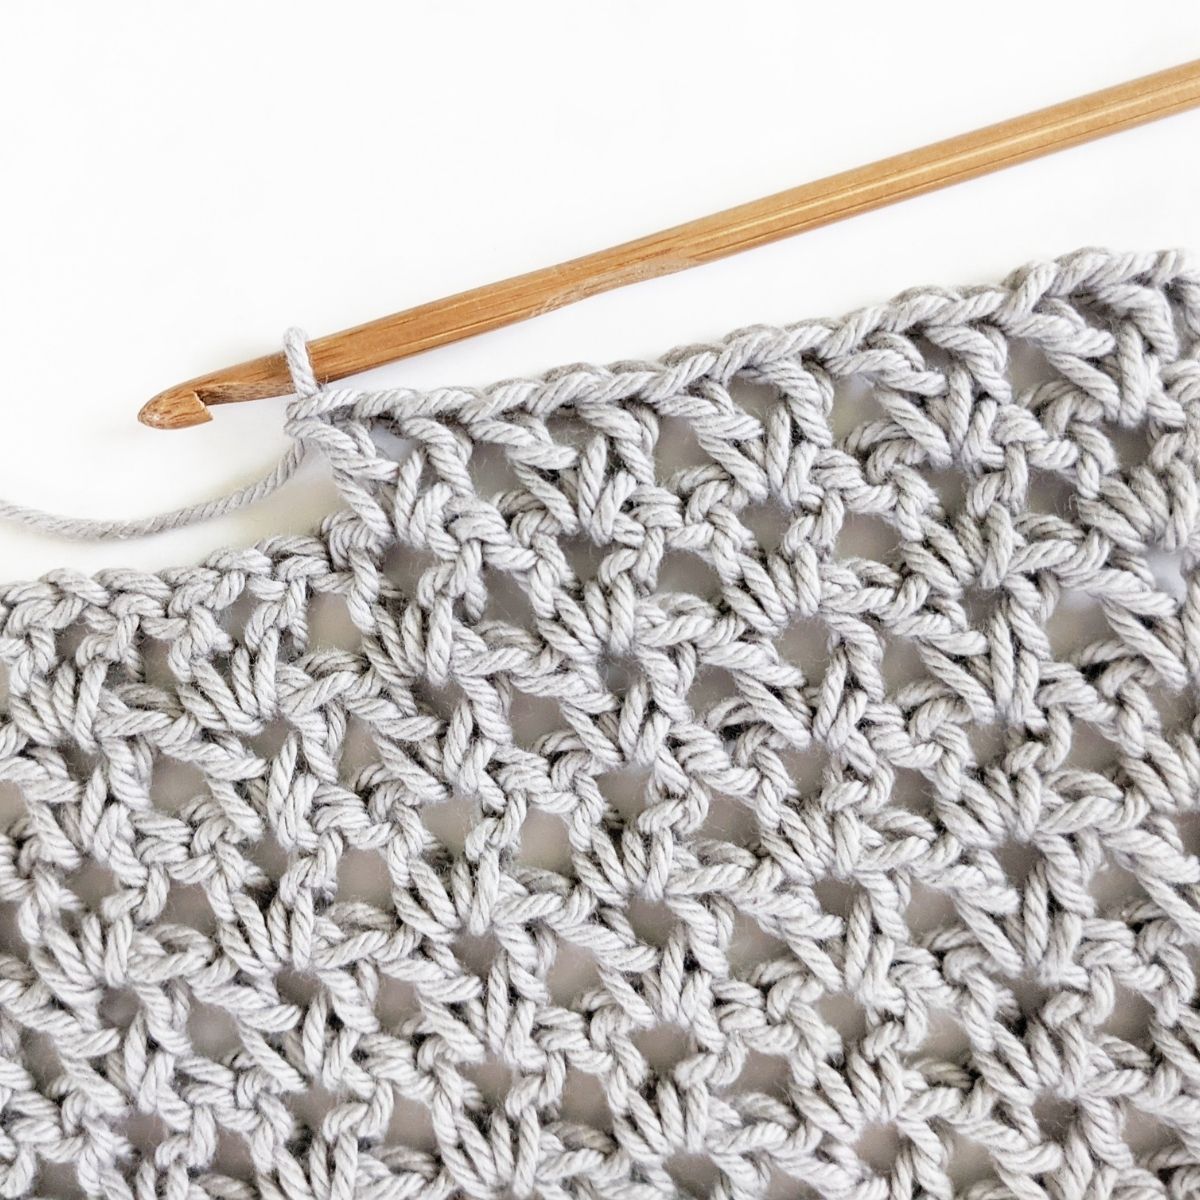 double crochet v-stitch swatch made with cotton yarn and a wooden crochet hook